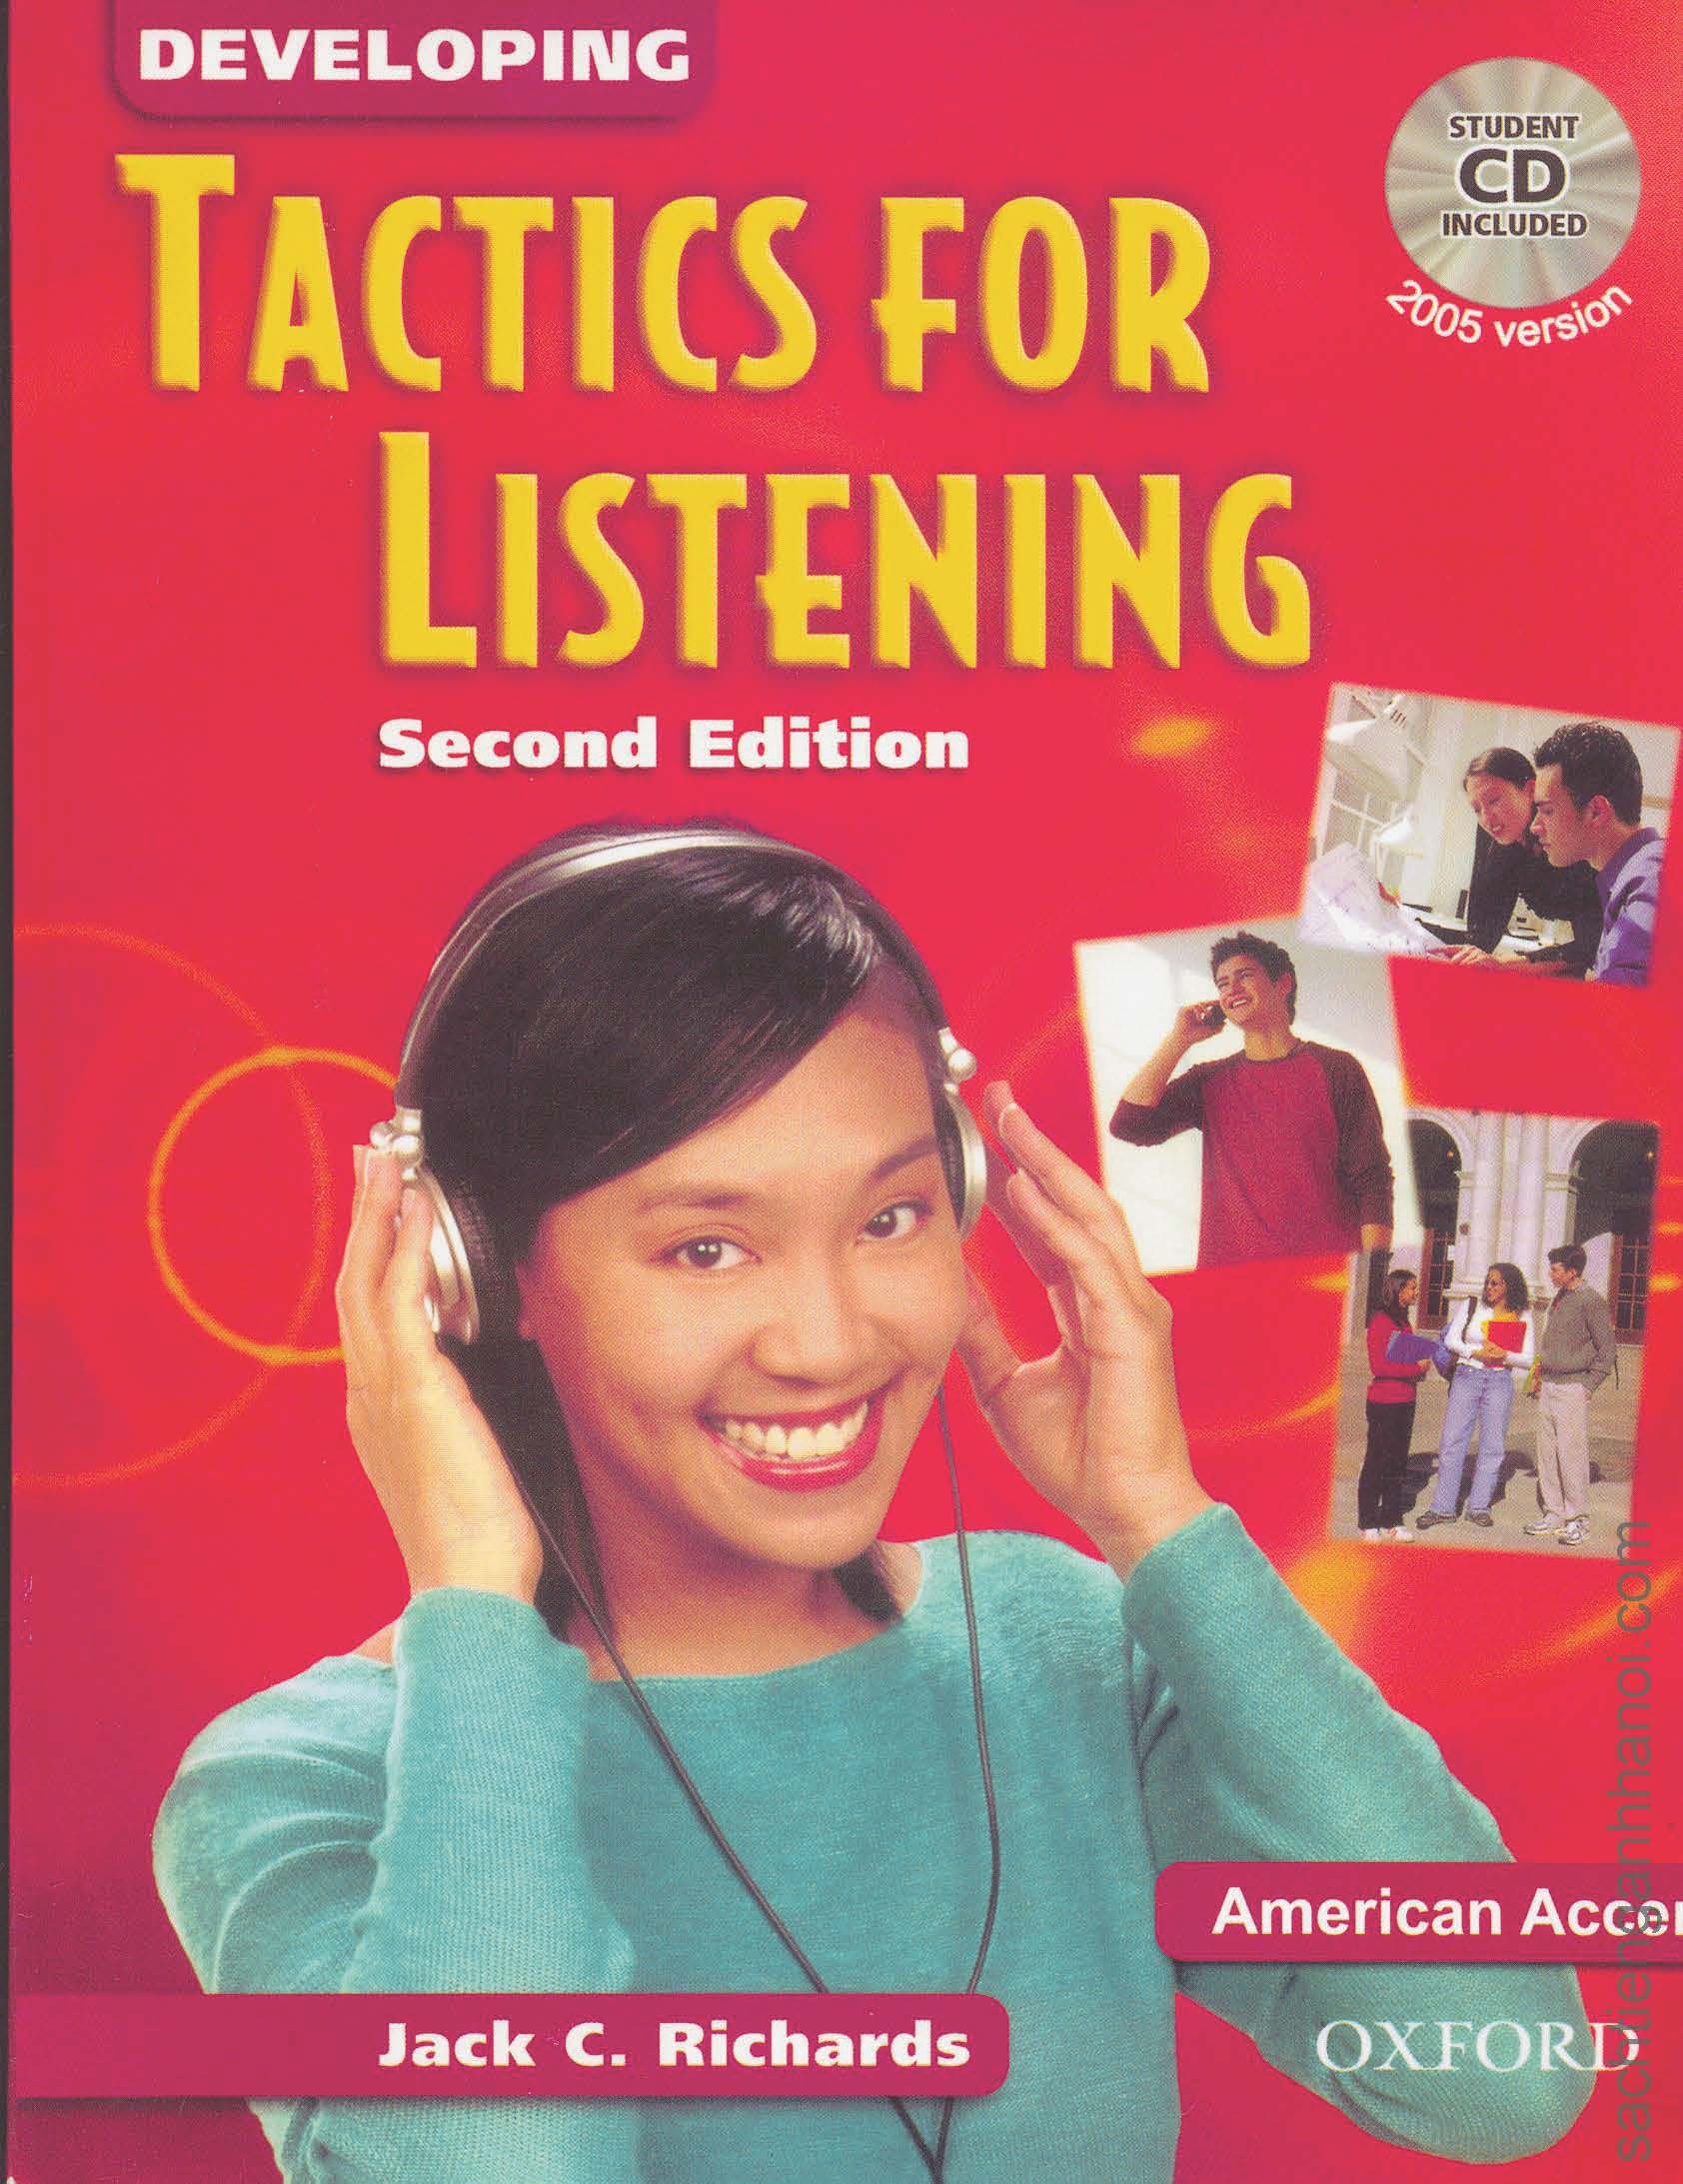 Developing-Tactics-for-Listening